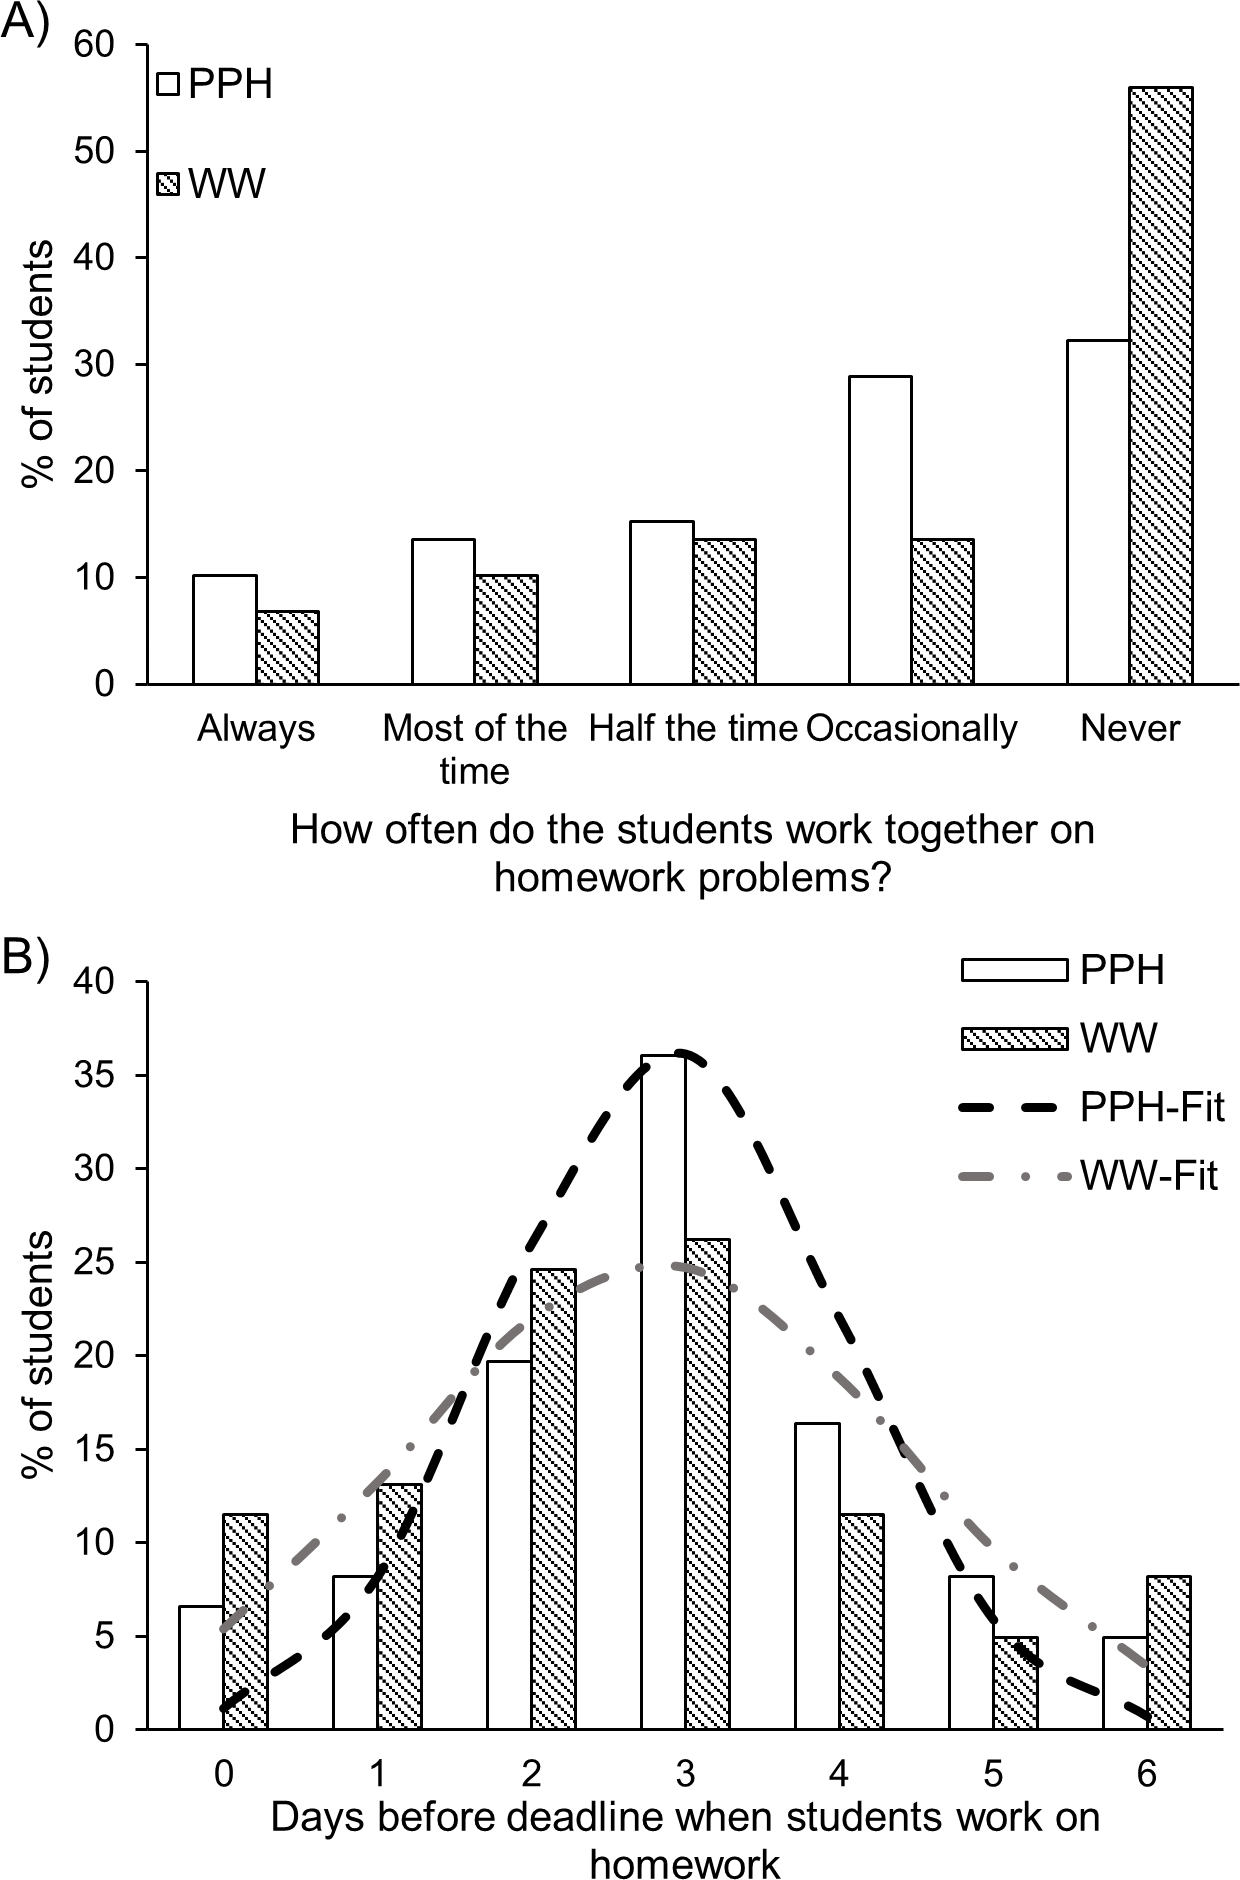 (A) Distribution of student responses to “How often do the students work together on homework problems?” (B) Distribution of student responses on the time when they start working on homework problems. The fit corresponds to normal distribution with µ = 2.9 and σ = 1.1 for PPH (pencil-and-paper–based homework) and µ = 2.8 and σ = 1.6 for WW (WeBWorK). 